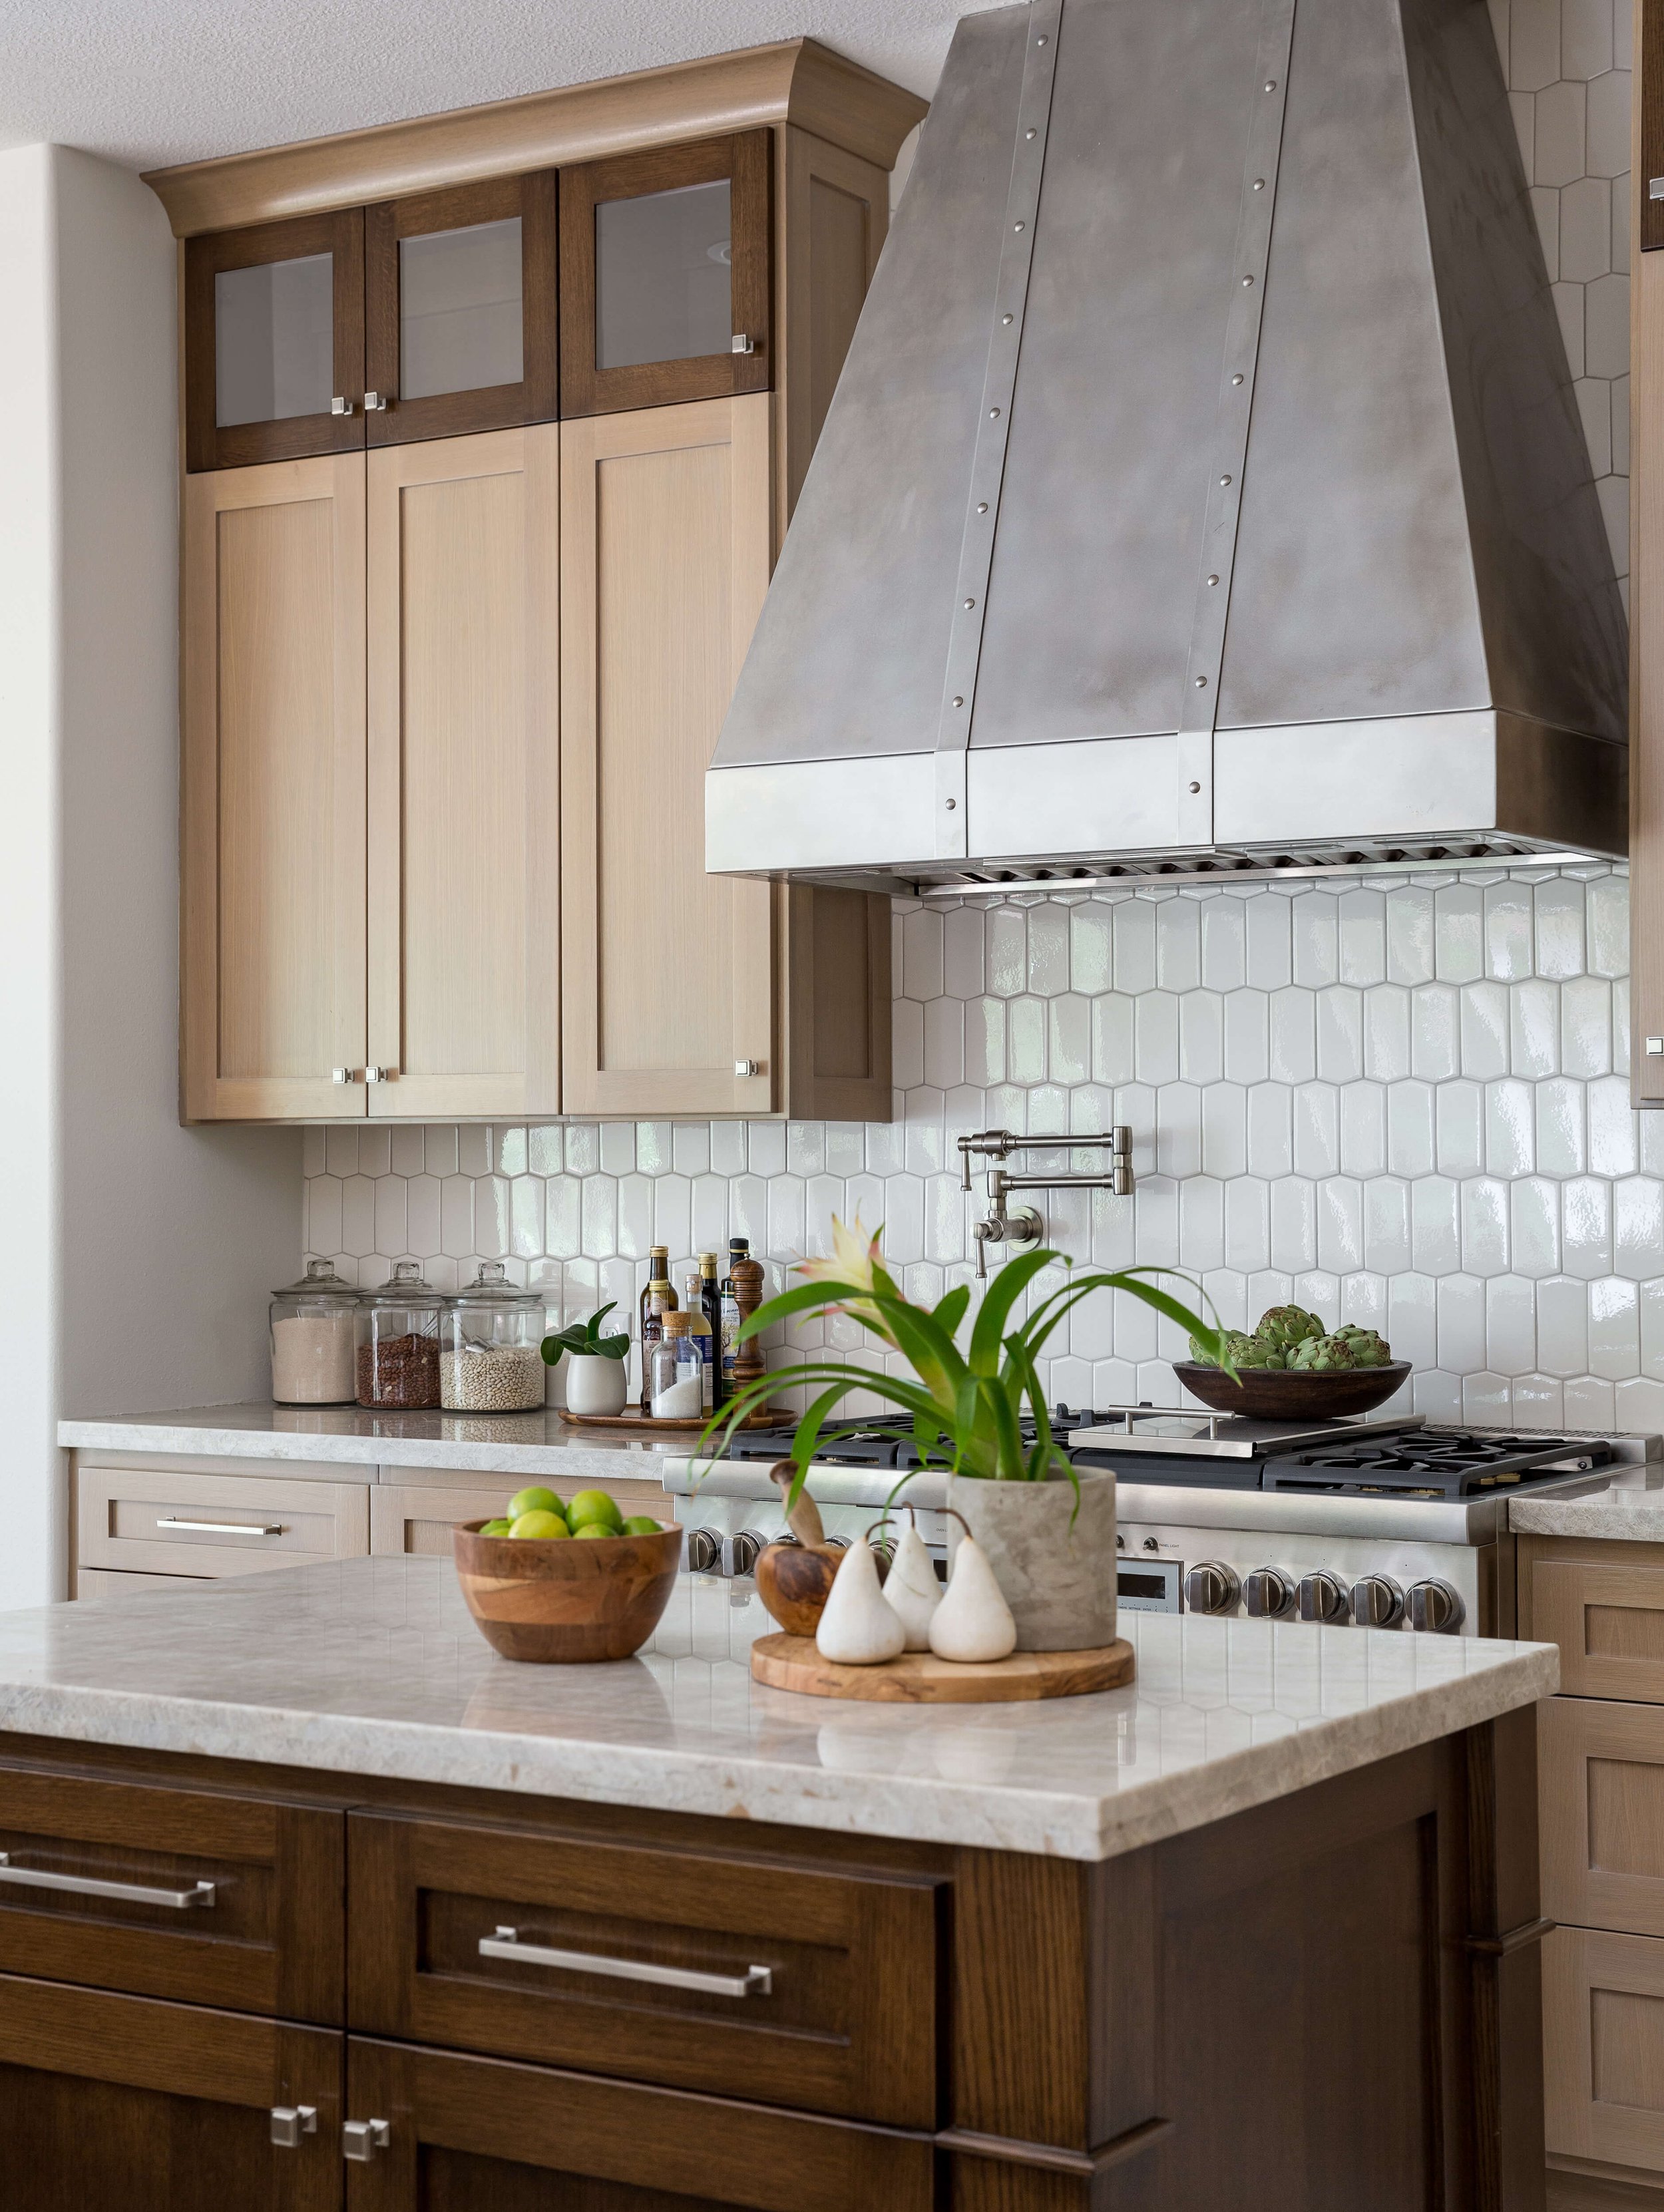 Do You Really Need a Range Hood Over Your Cooking Stove? 